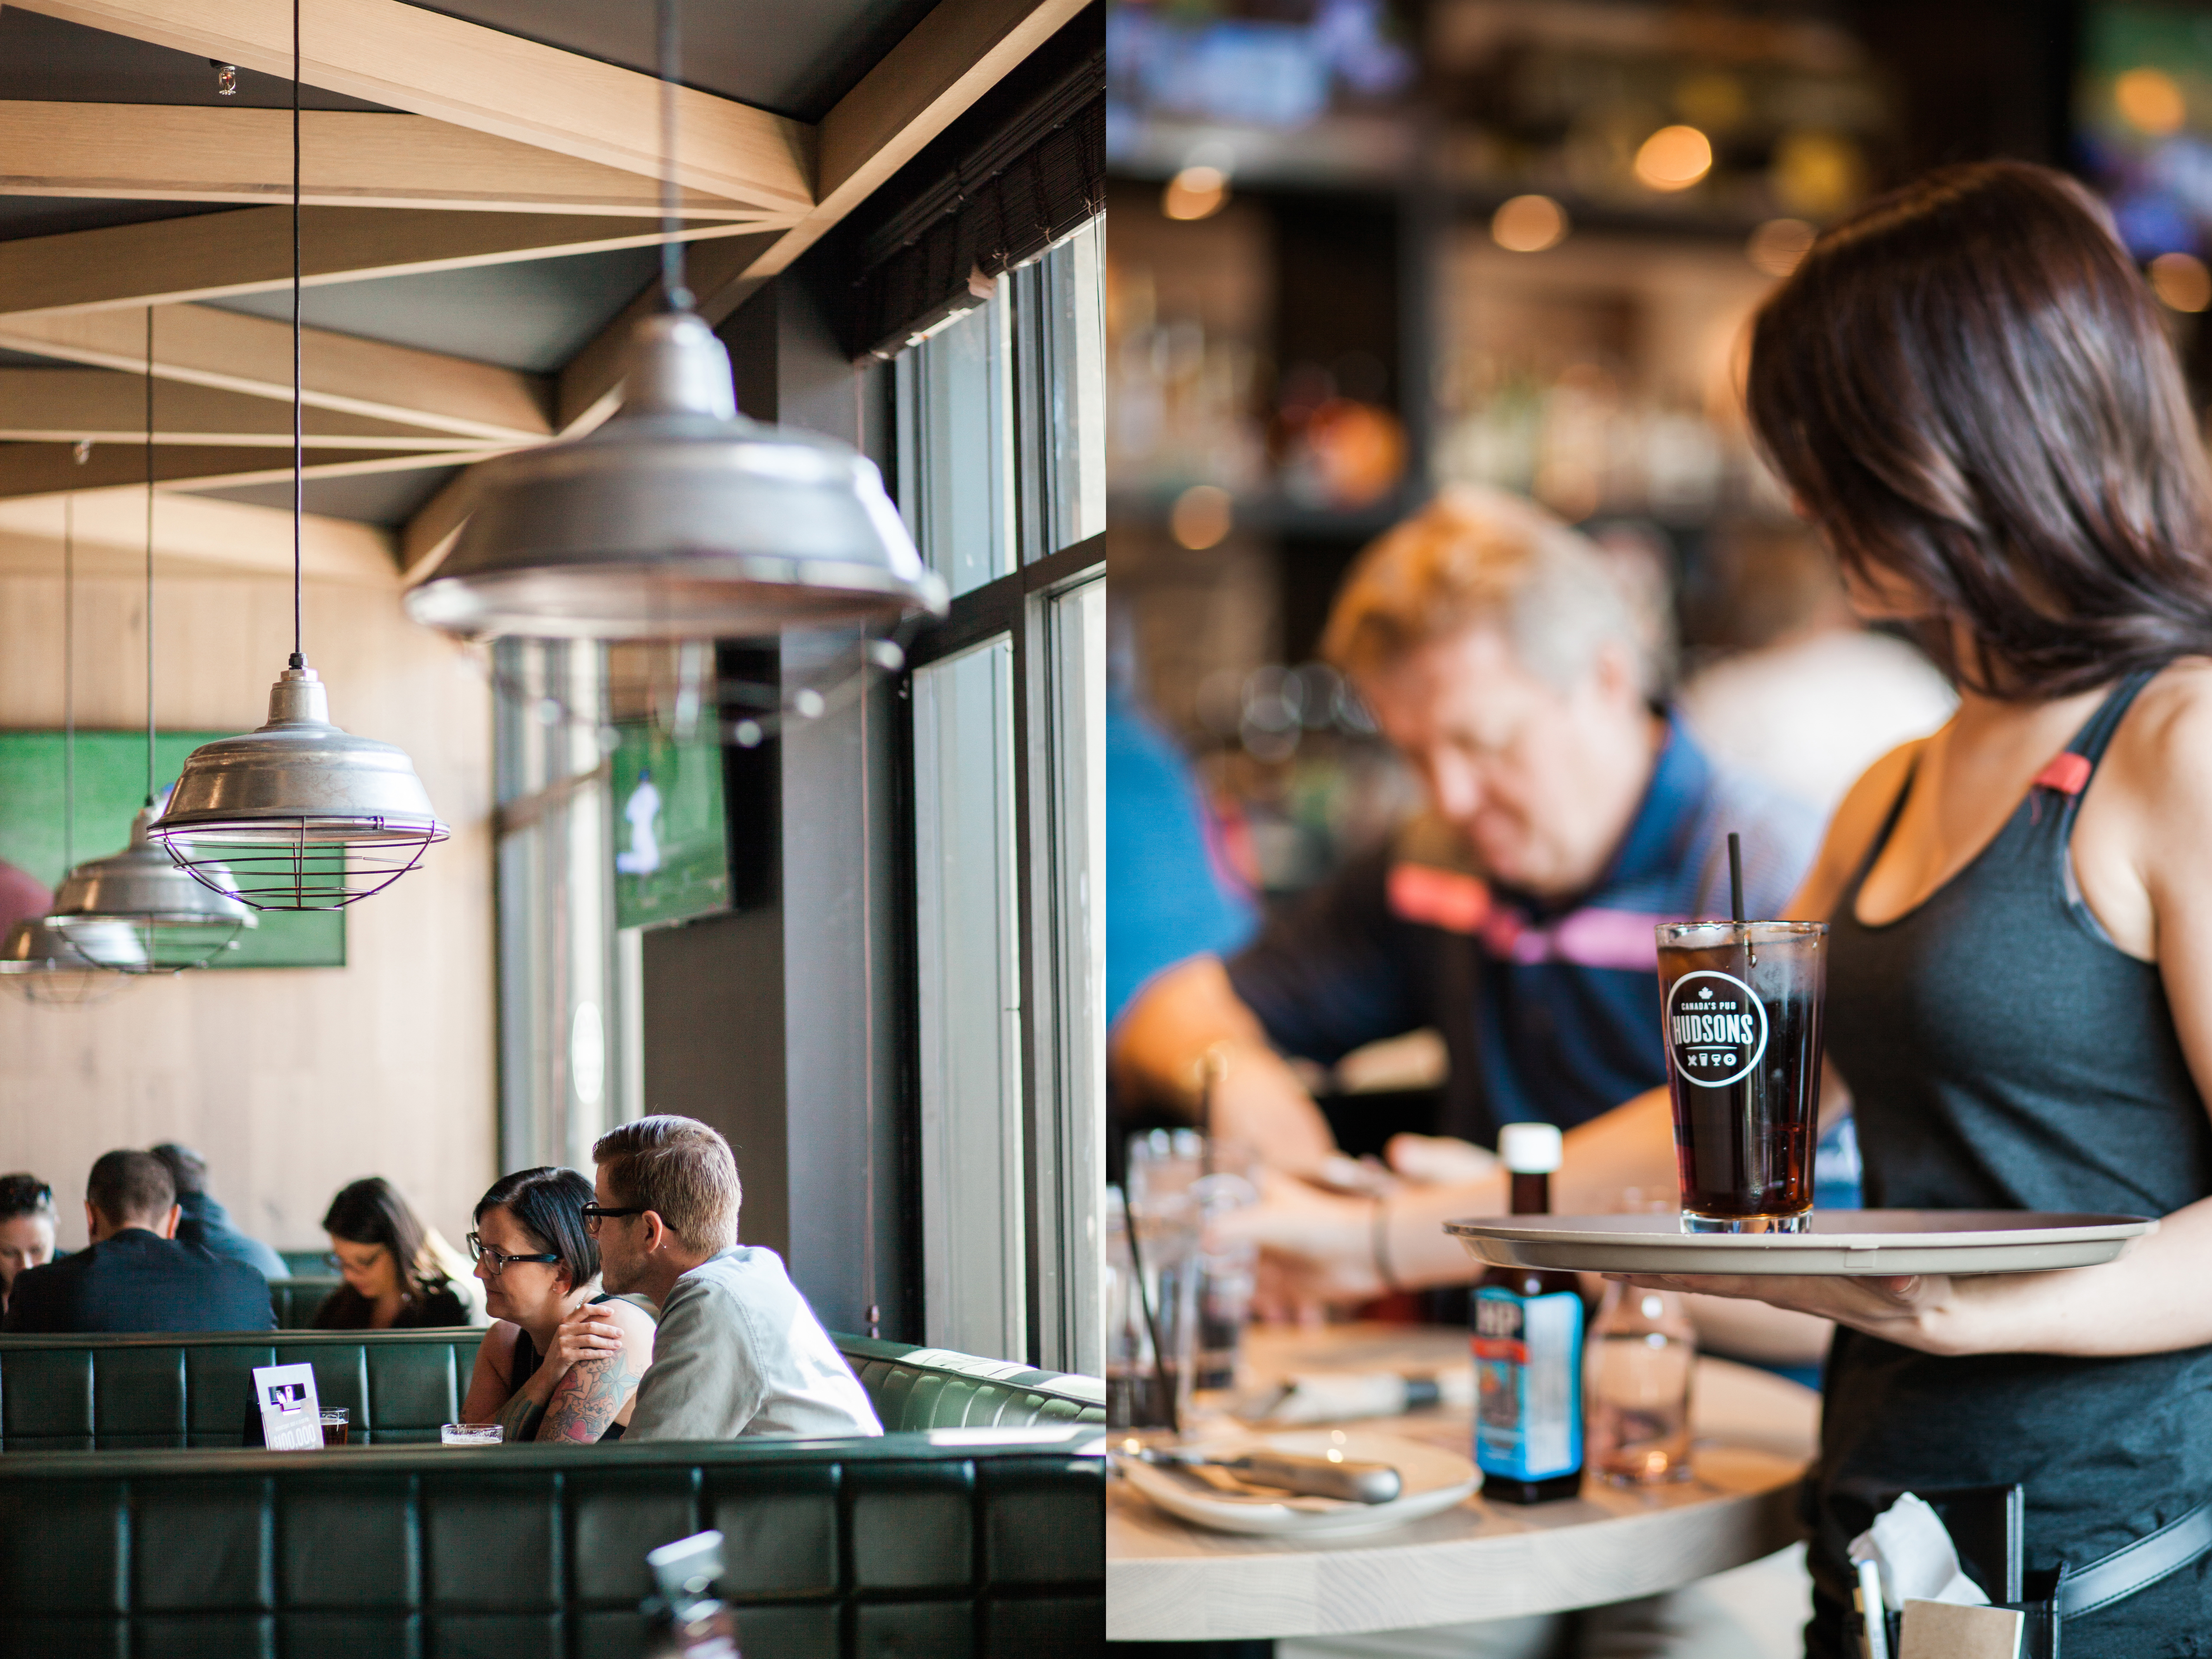 Hudsons Canadas Pub Branded Environment | Dossier Creative | Transformation with Canadian Flair